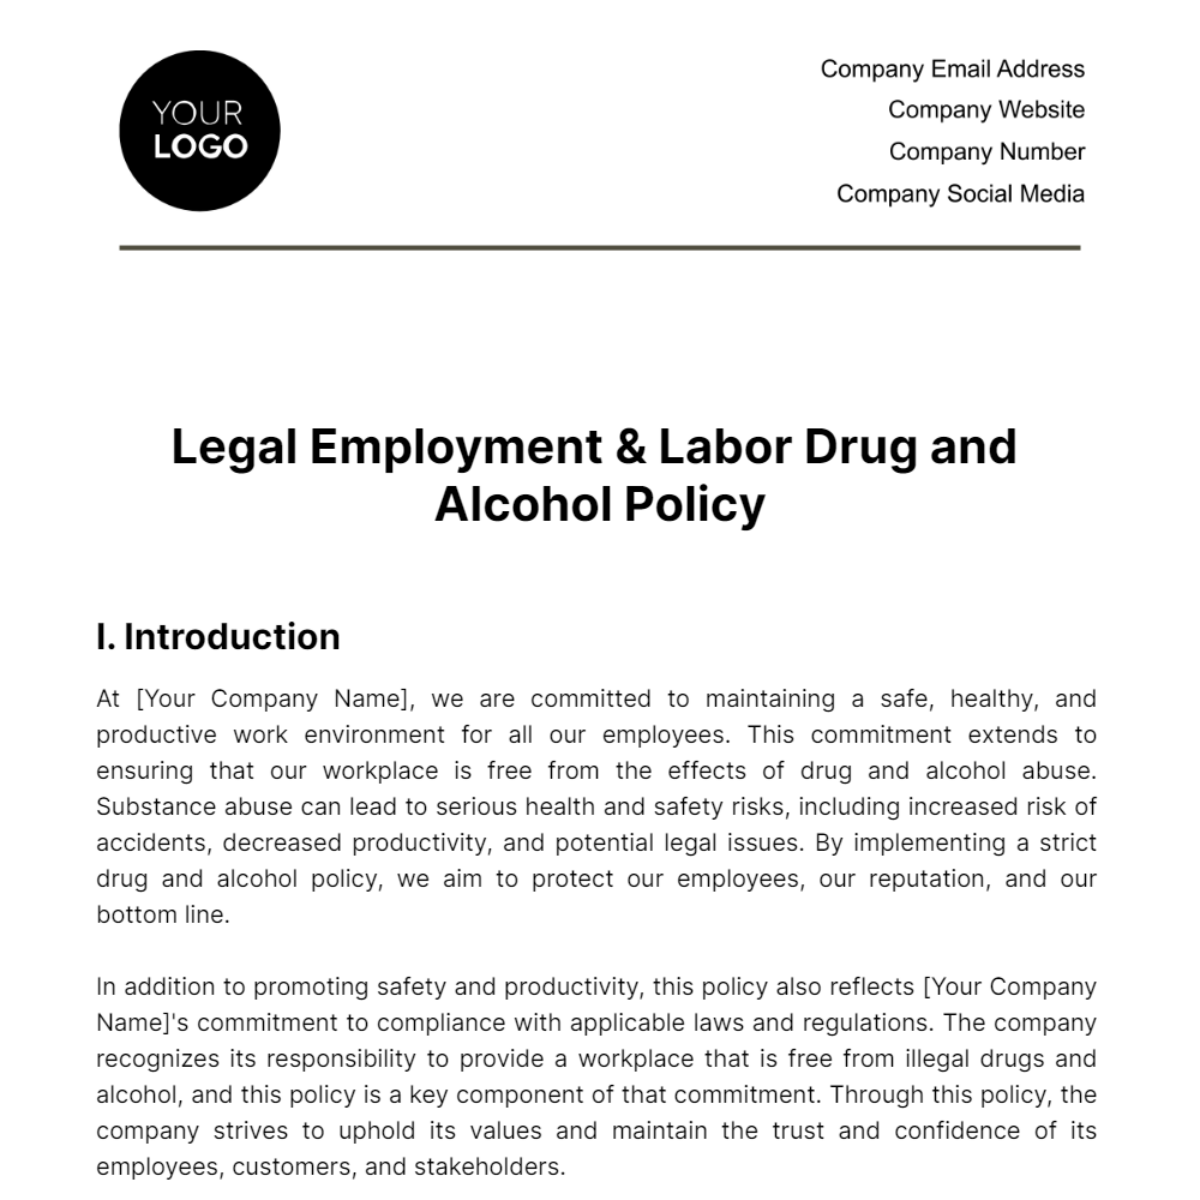 Legal Employment & Labor Drug and Alcohol Policy Template